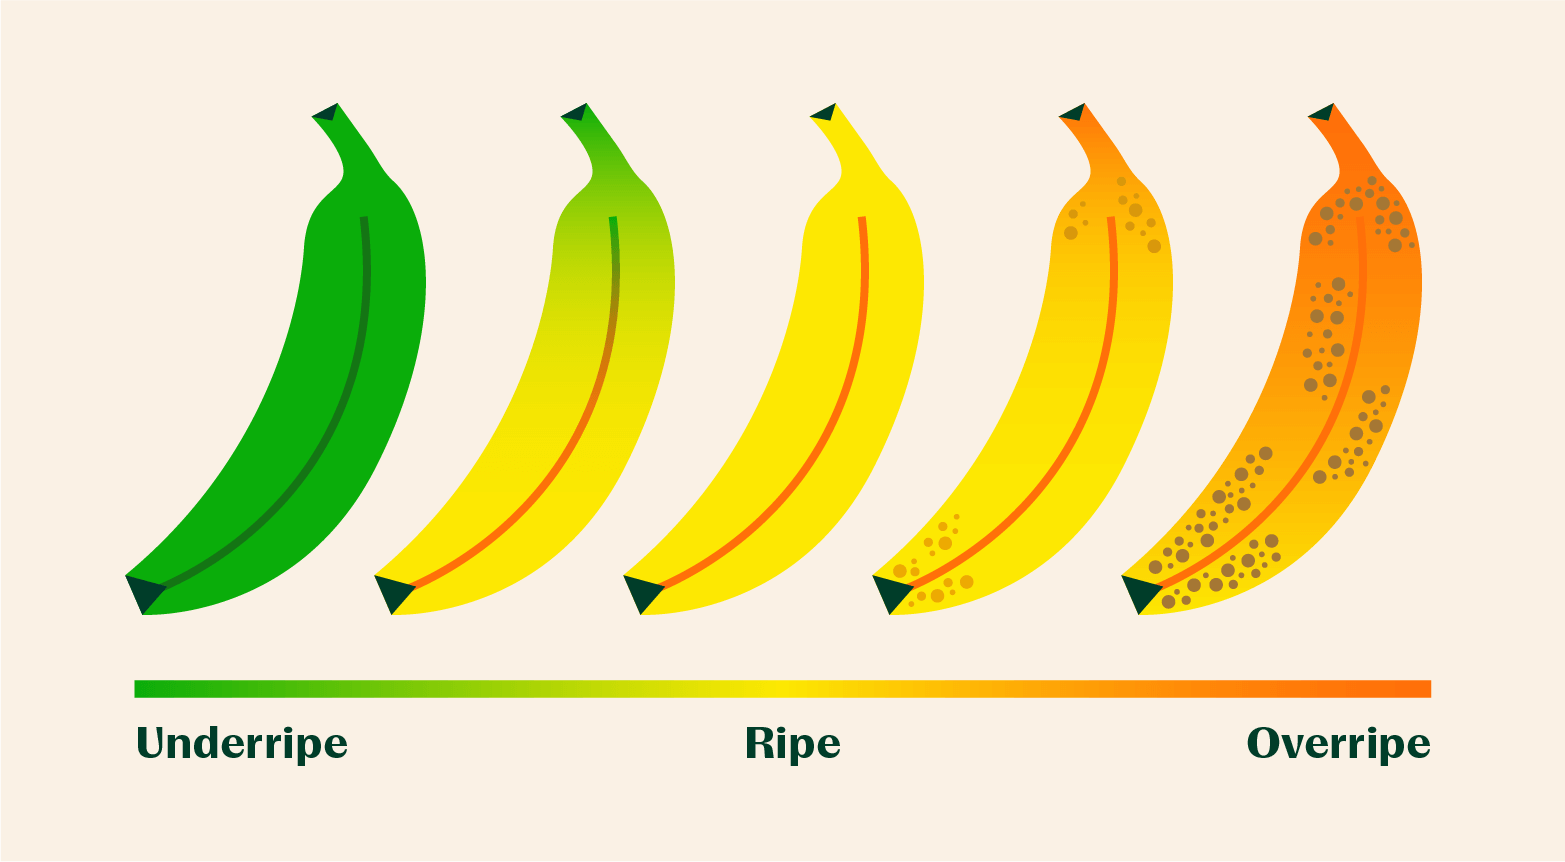 How to Keep Bananas from Ripening Too Fast